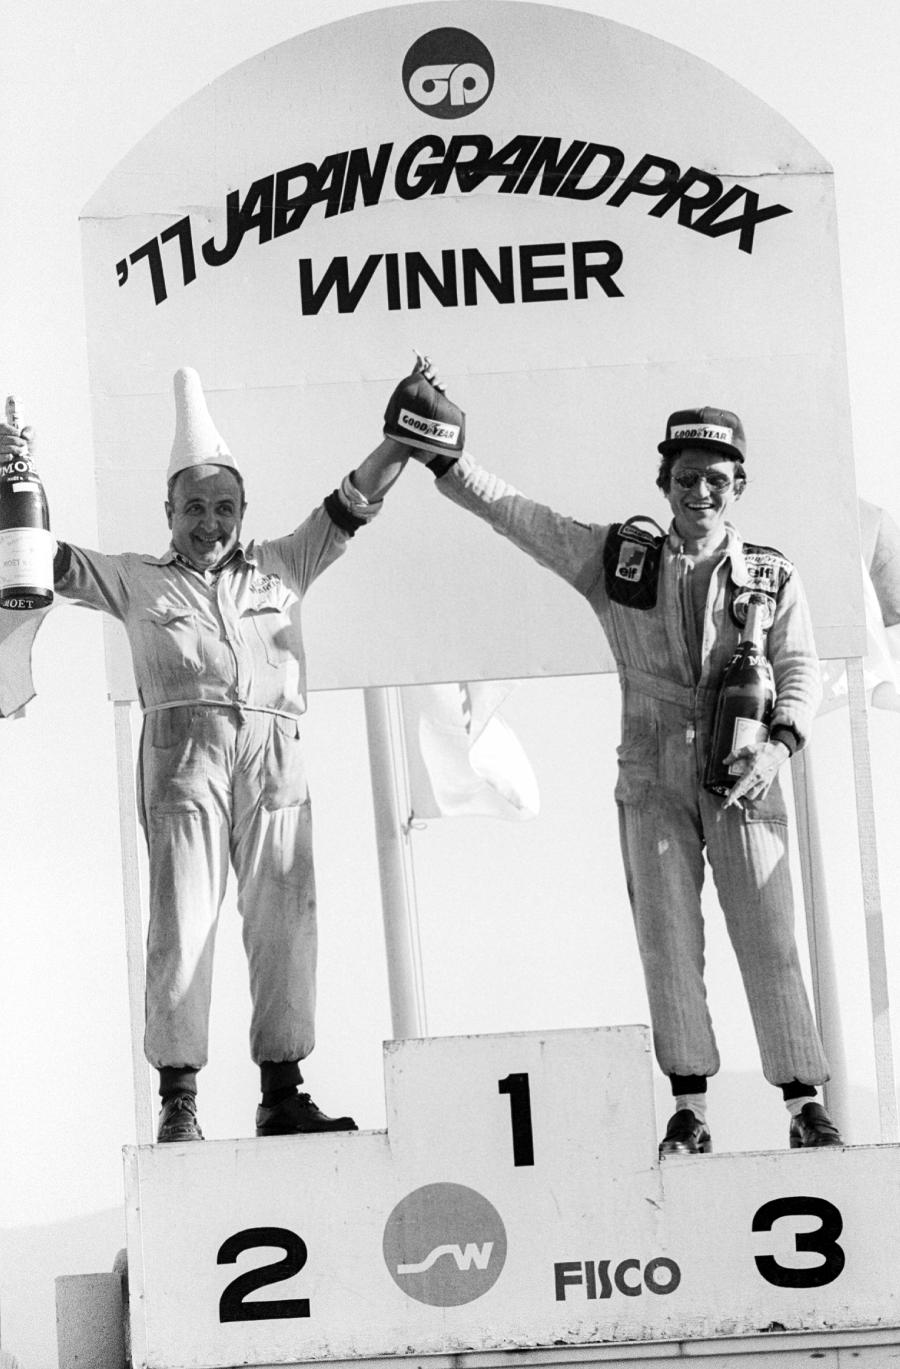 Patrick Depailler was the only driver to take to the podium and celebrates with the Marelli Magneti representative